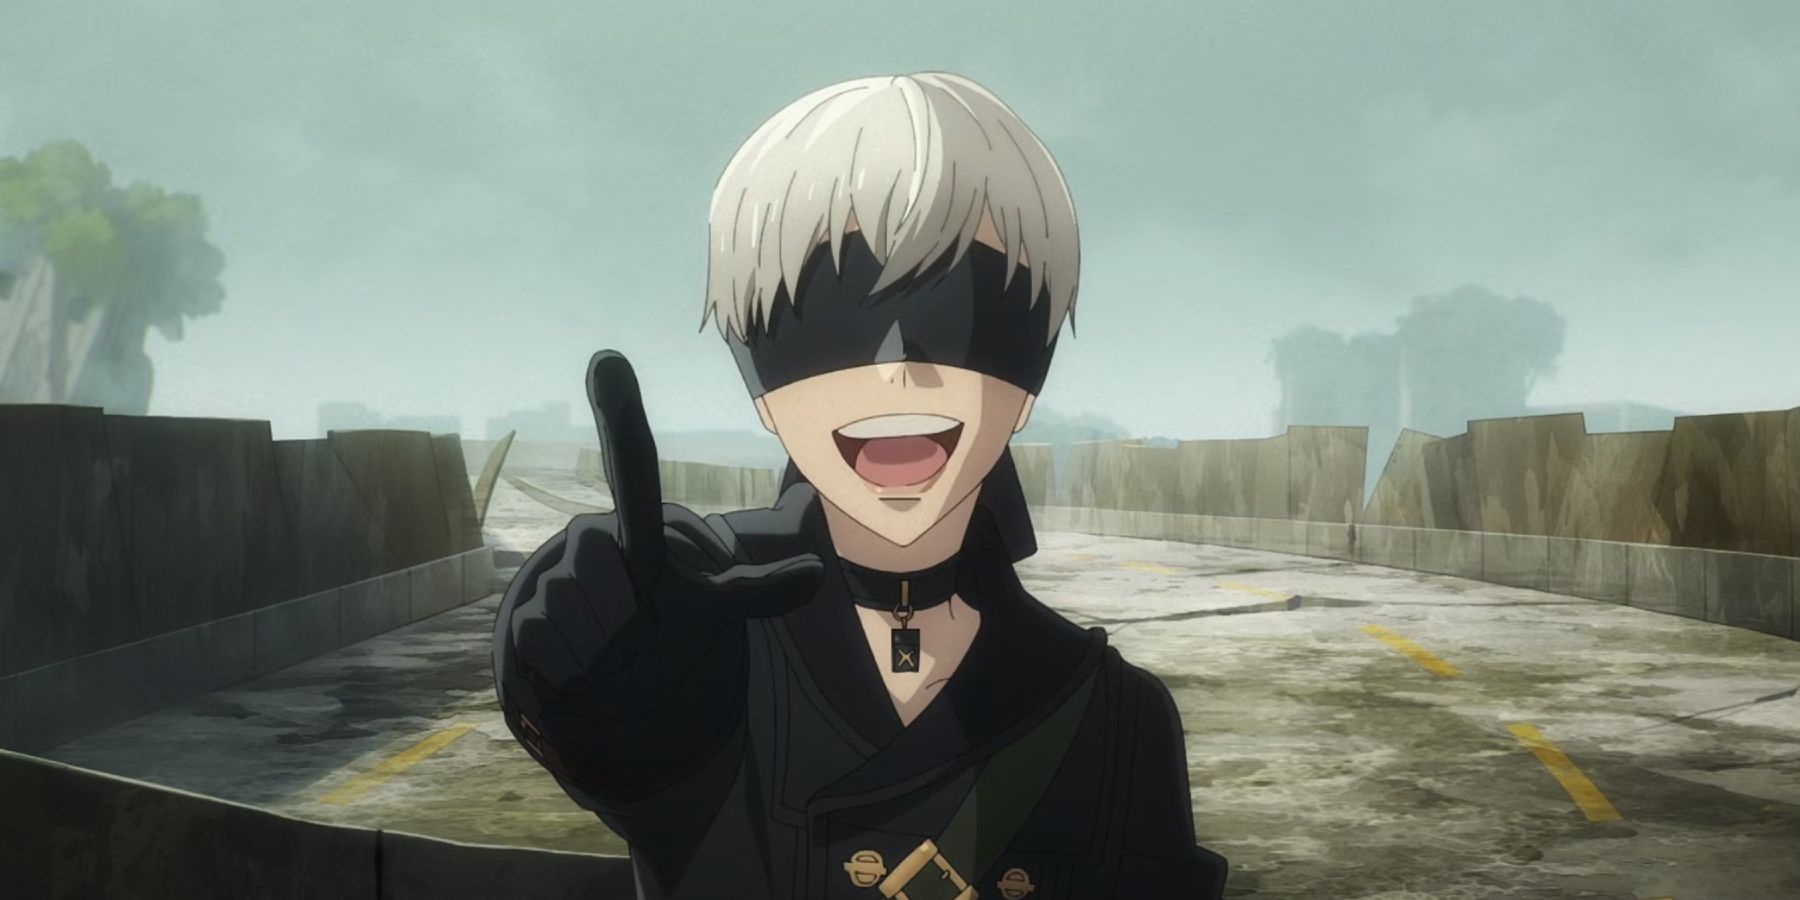 NieR:Automata Ver1.1a' Uploads to Crunchyroll (New Character Trailers) |  Animation Magazine